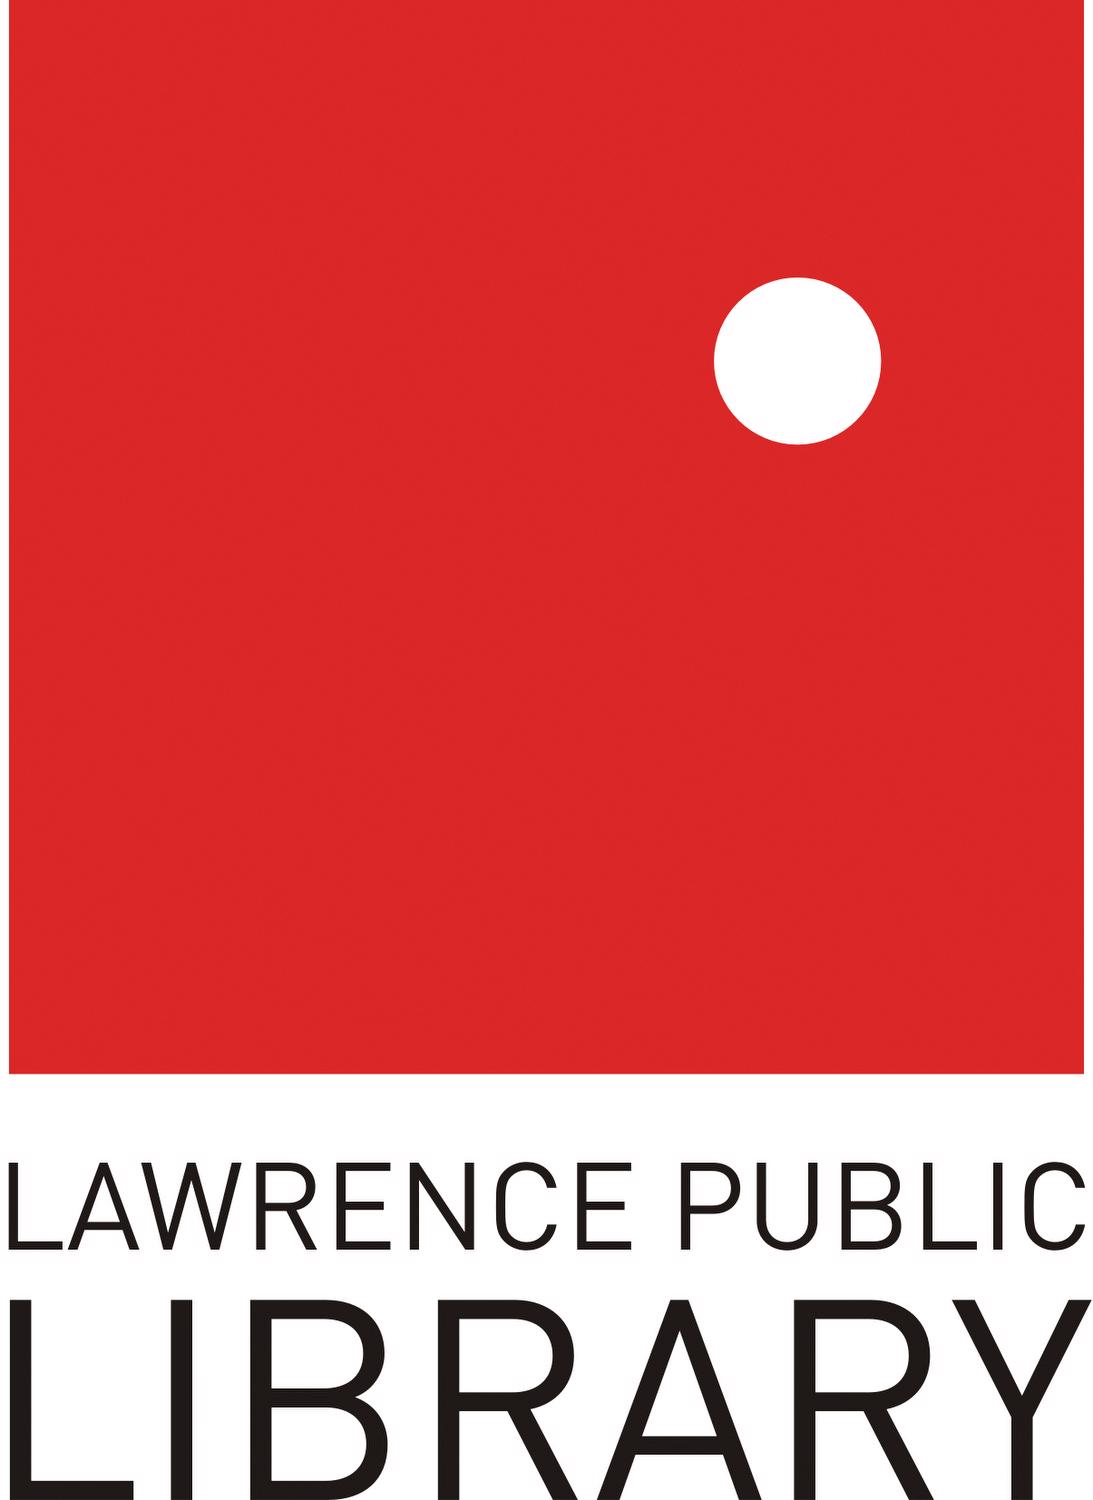 Lawrence Public Library logo red box with white circle